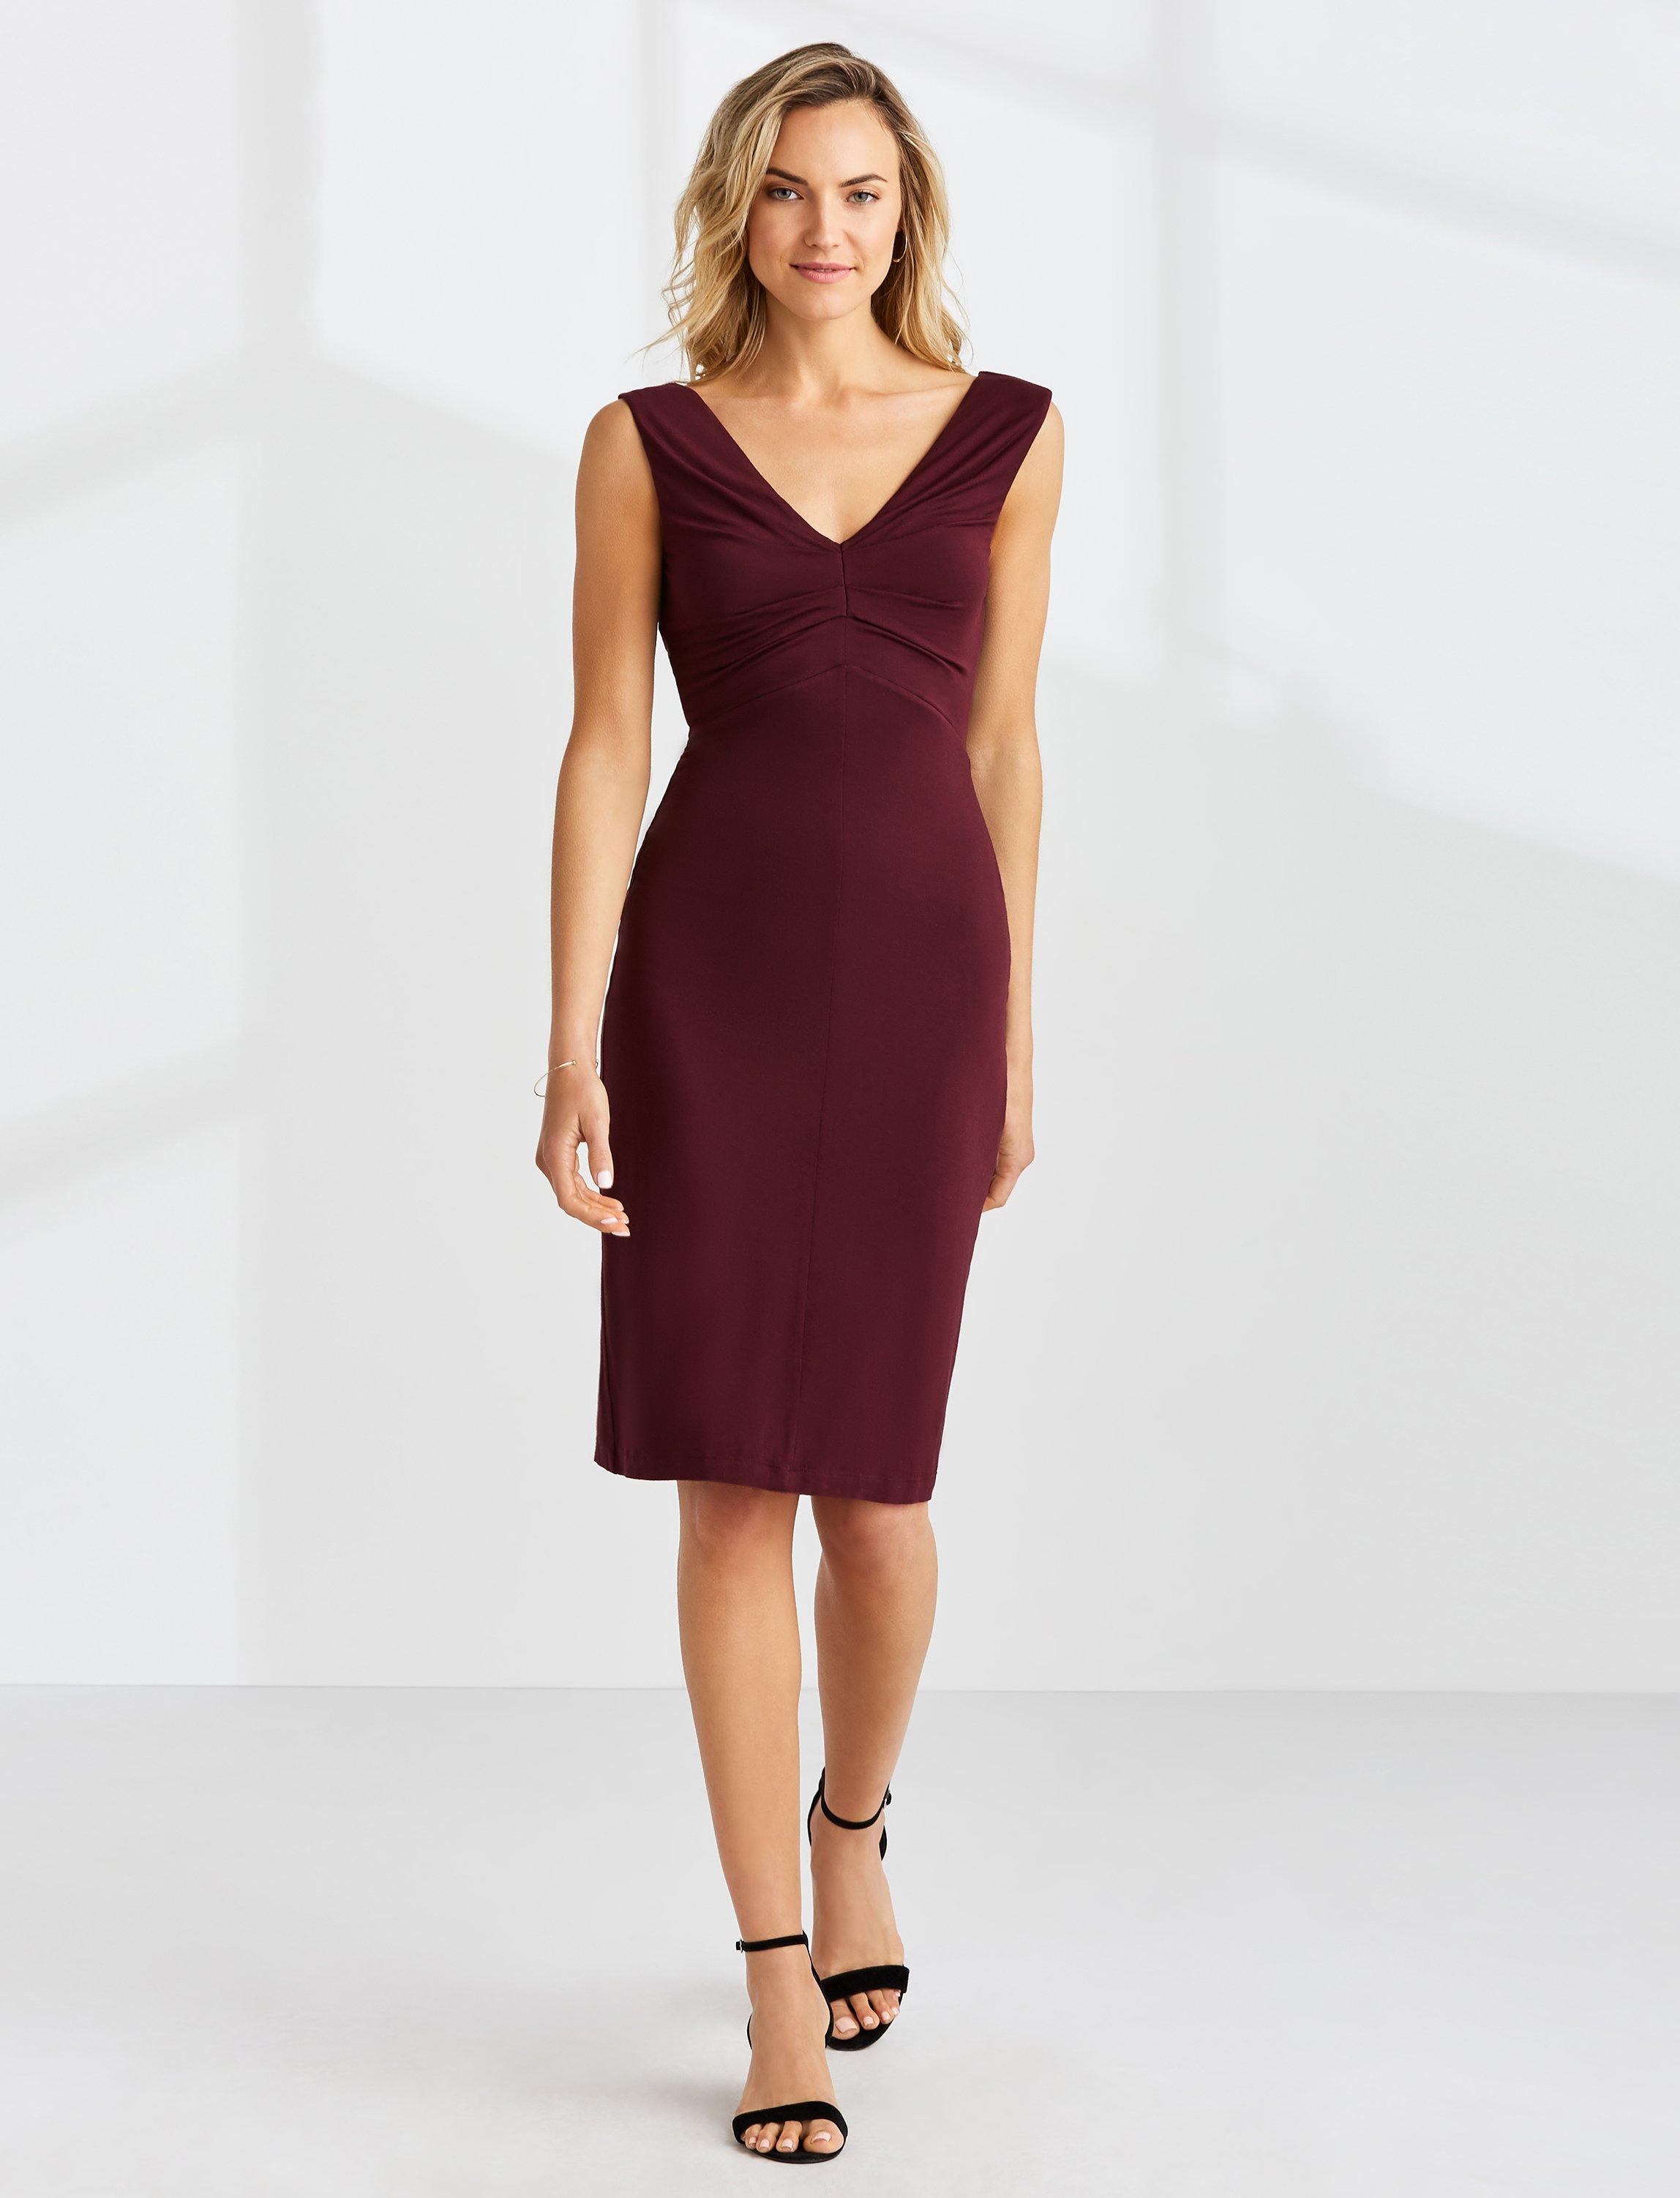 Bailey 44 Elodie Dress in Red - Lyst